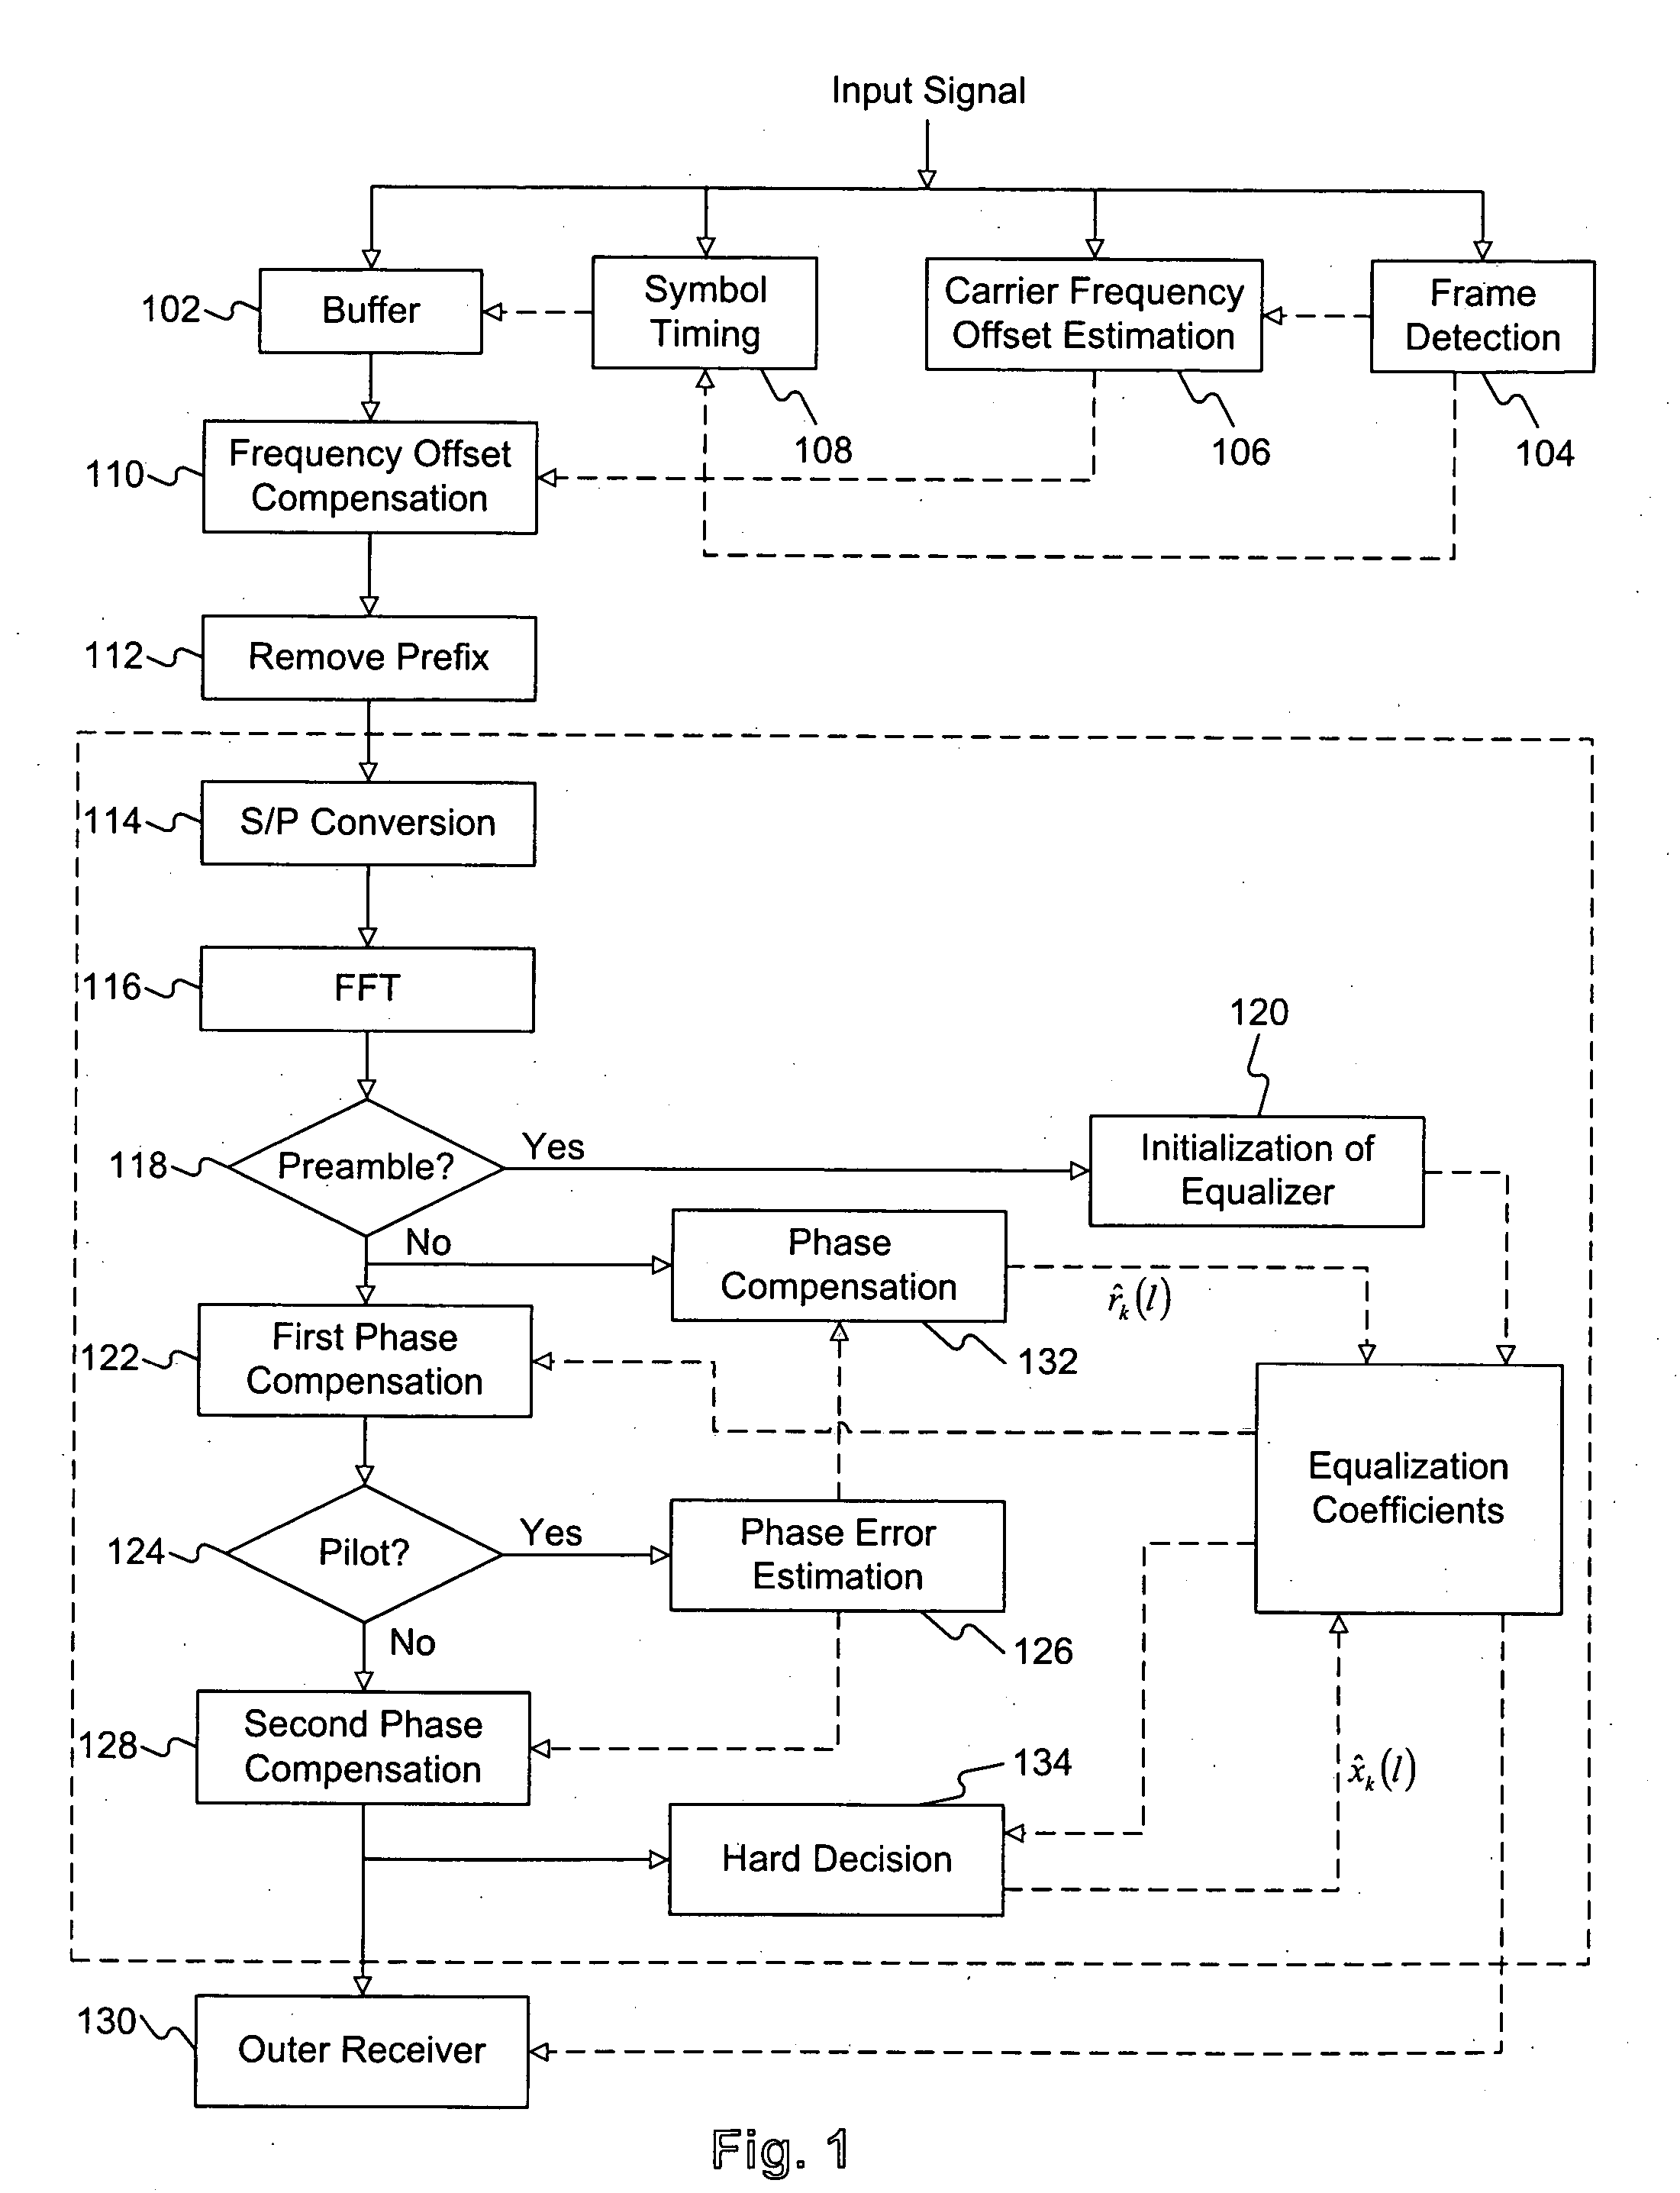 Method of equalization in an OFDM system